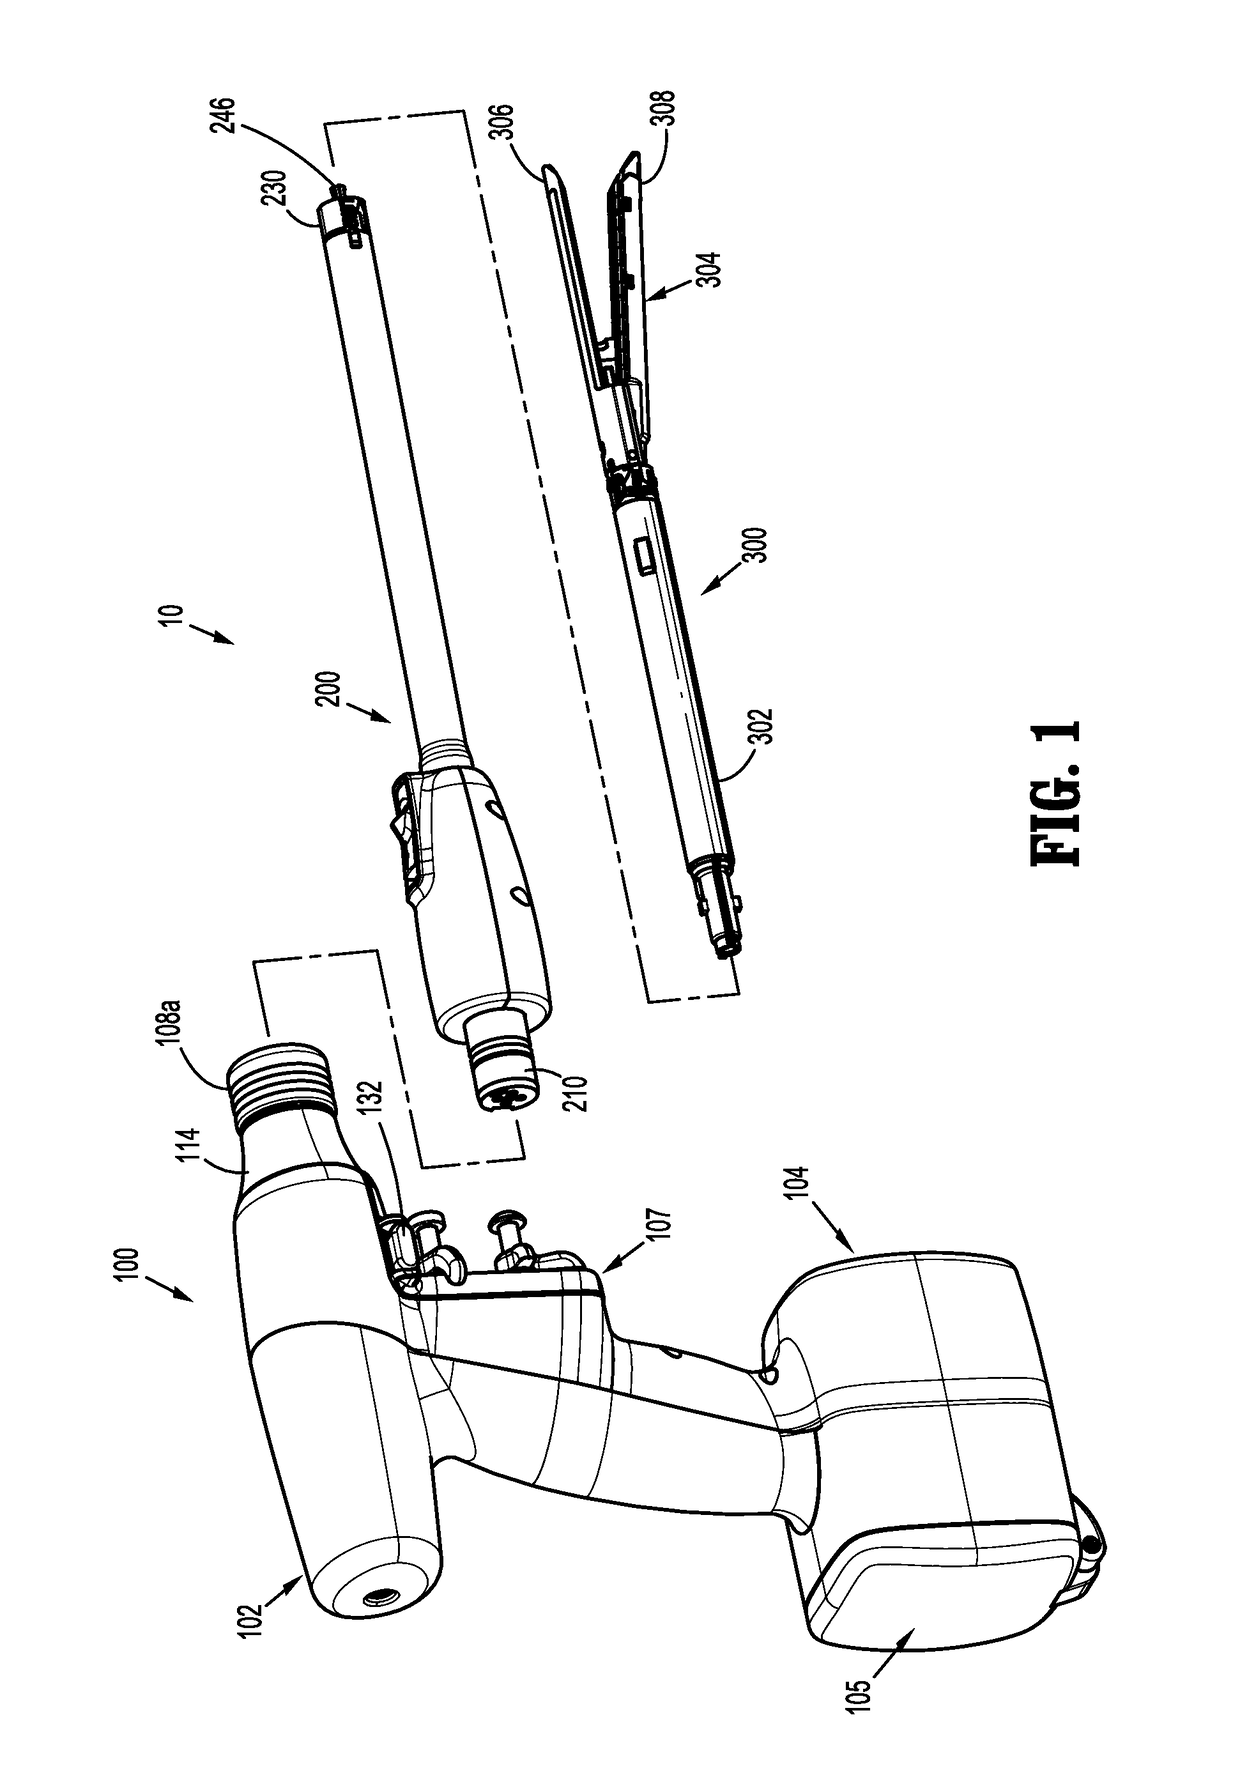 Method of emergency retraction for electro-mechanical surgical devices and systems